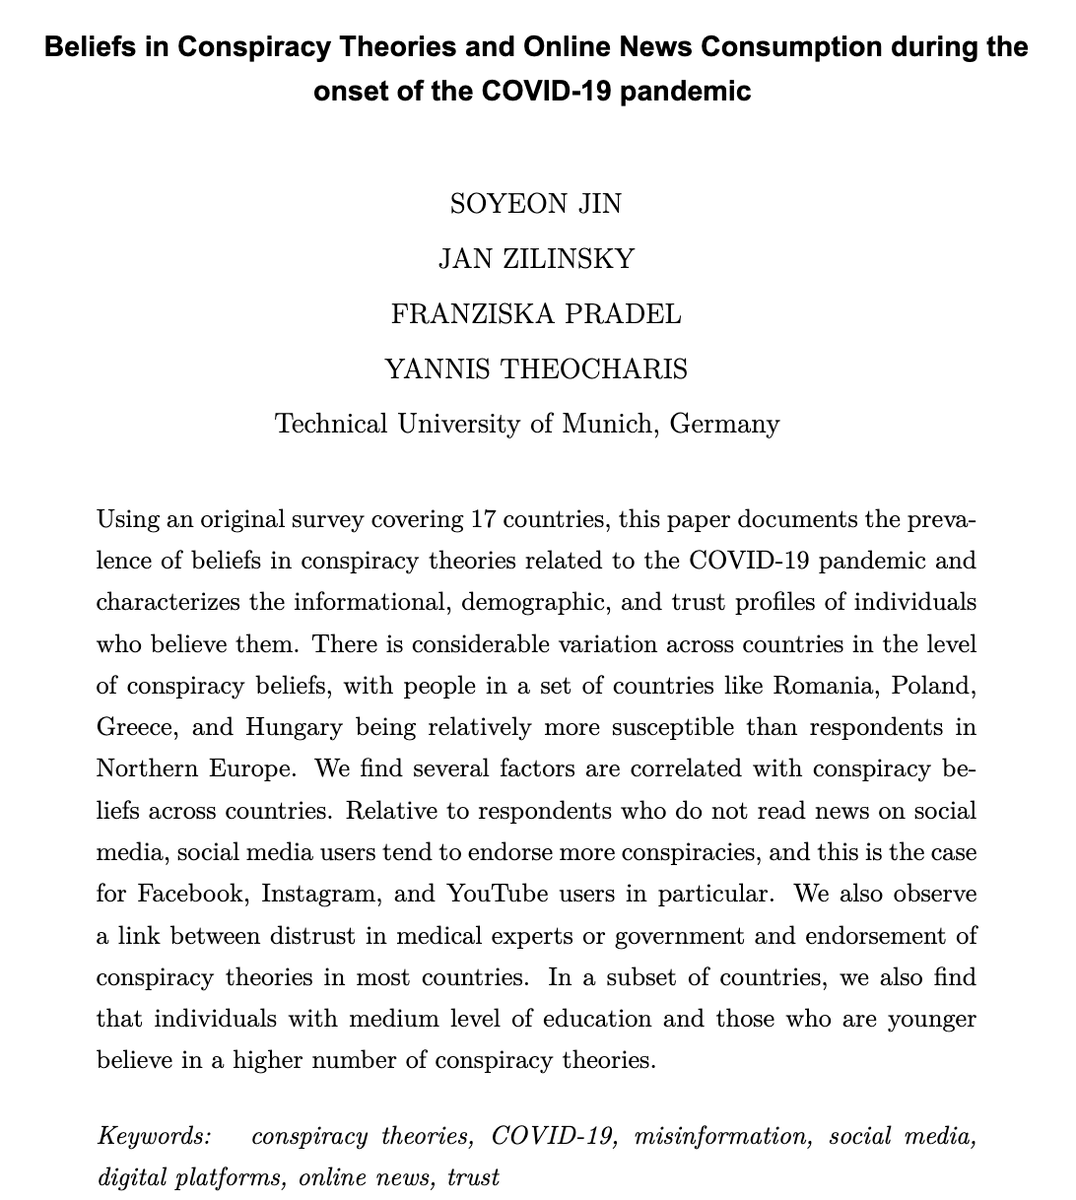 📢 I am very excited that our paper “Beliefs in Conspiracy Theories and Online News Consumption during the onset of the COVID-19 pandemic” is now published! 🎉👍 @Yannis_Theo @janzilinsky @FranziskaPradel (see thread 🧵⬇️)